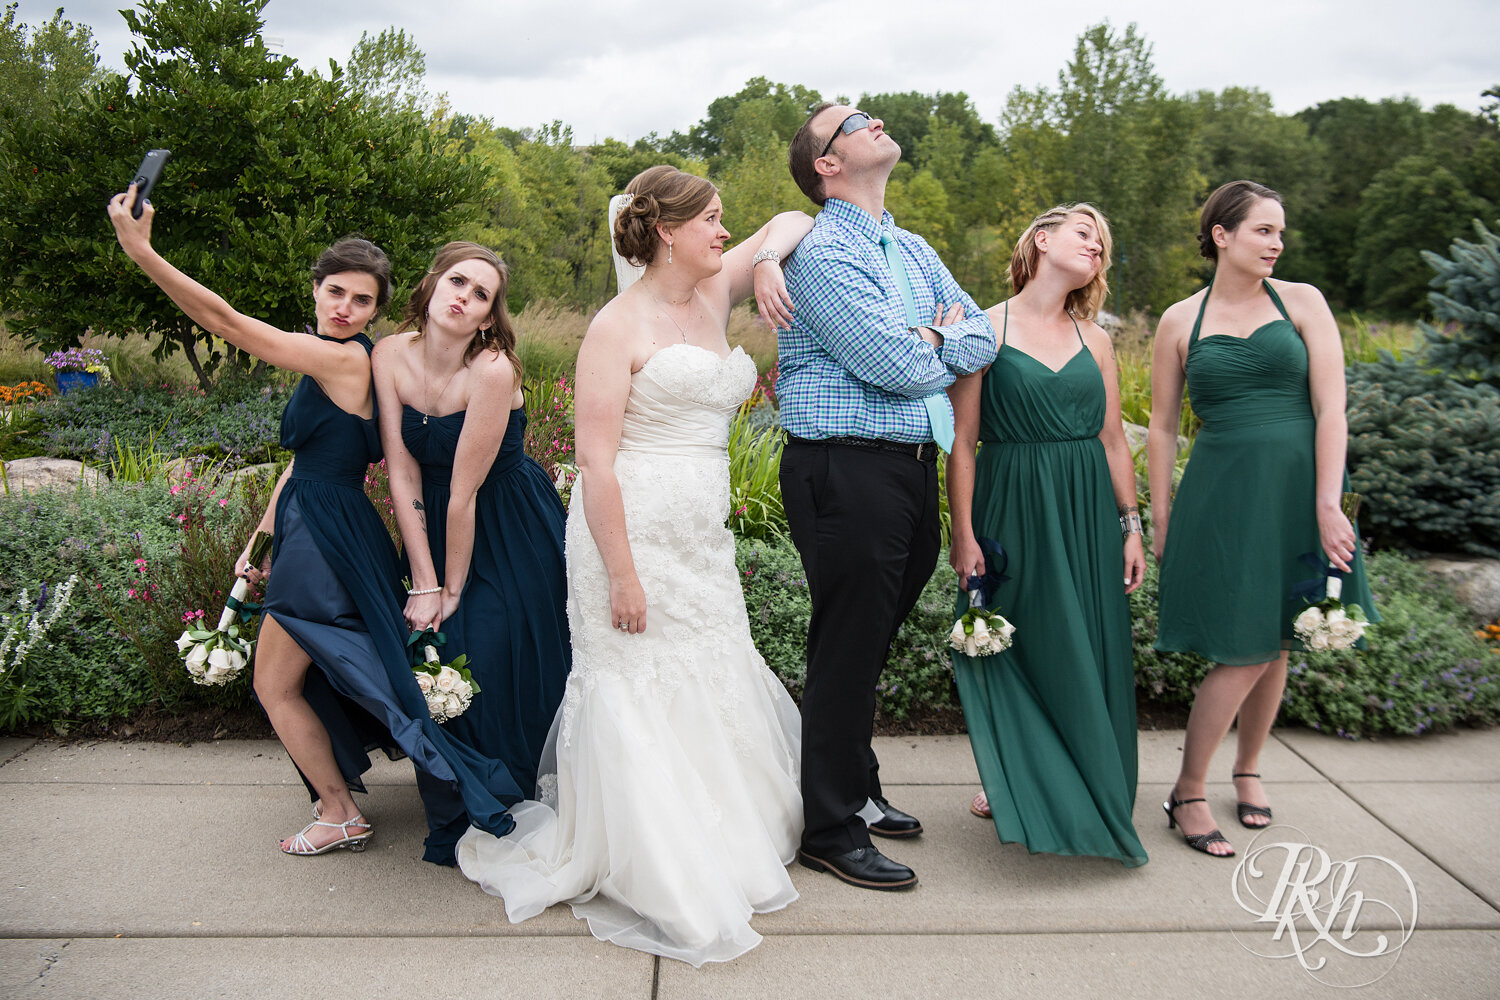 Wedding party in blue and green dresses laugh at Eagan Community Center in Eagan, Minnesota.